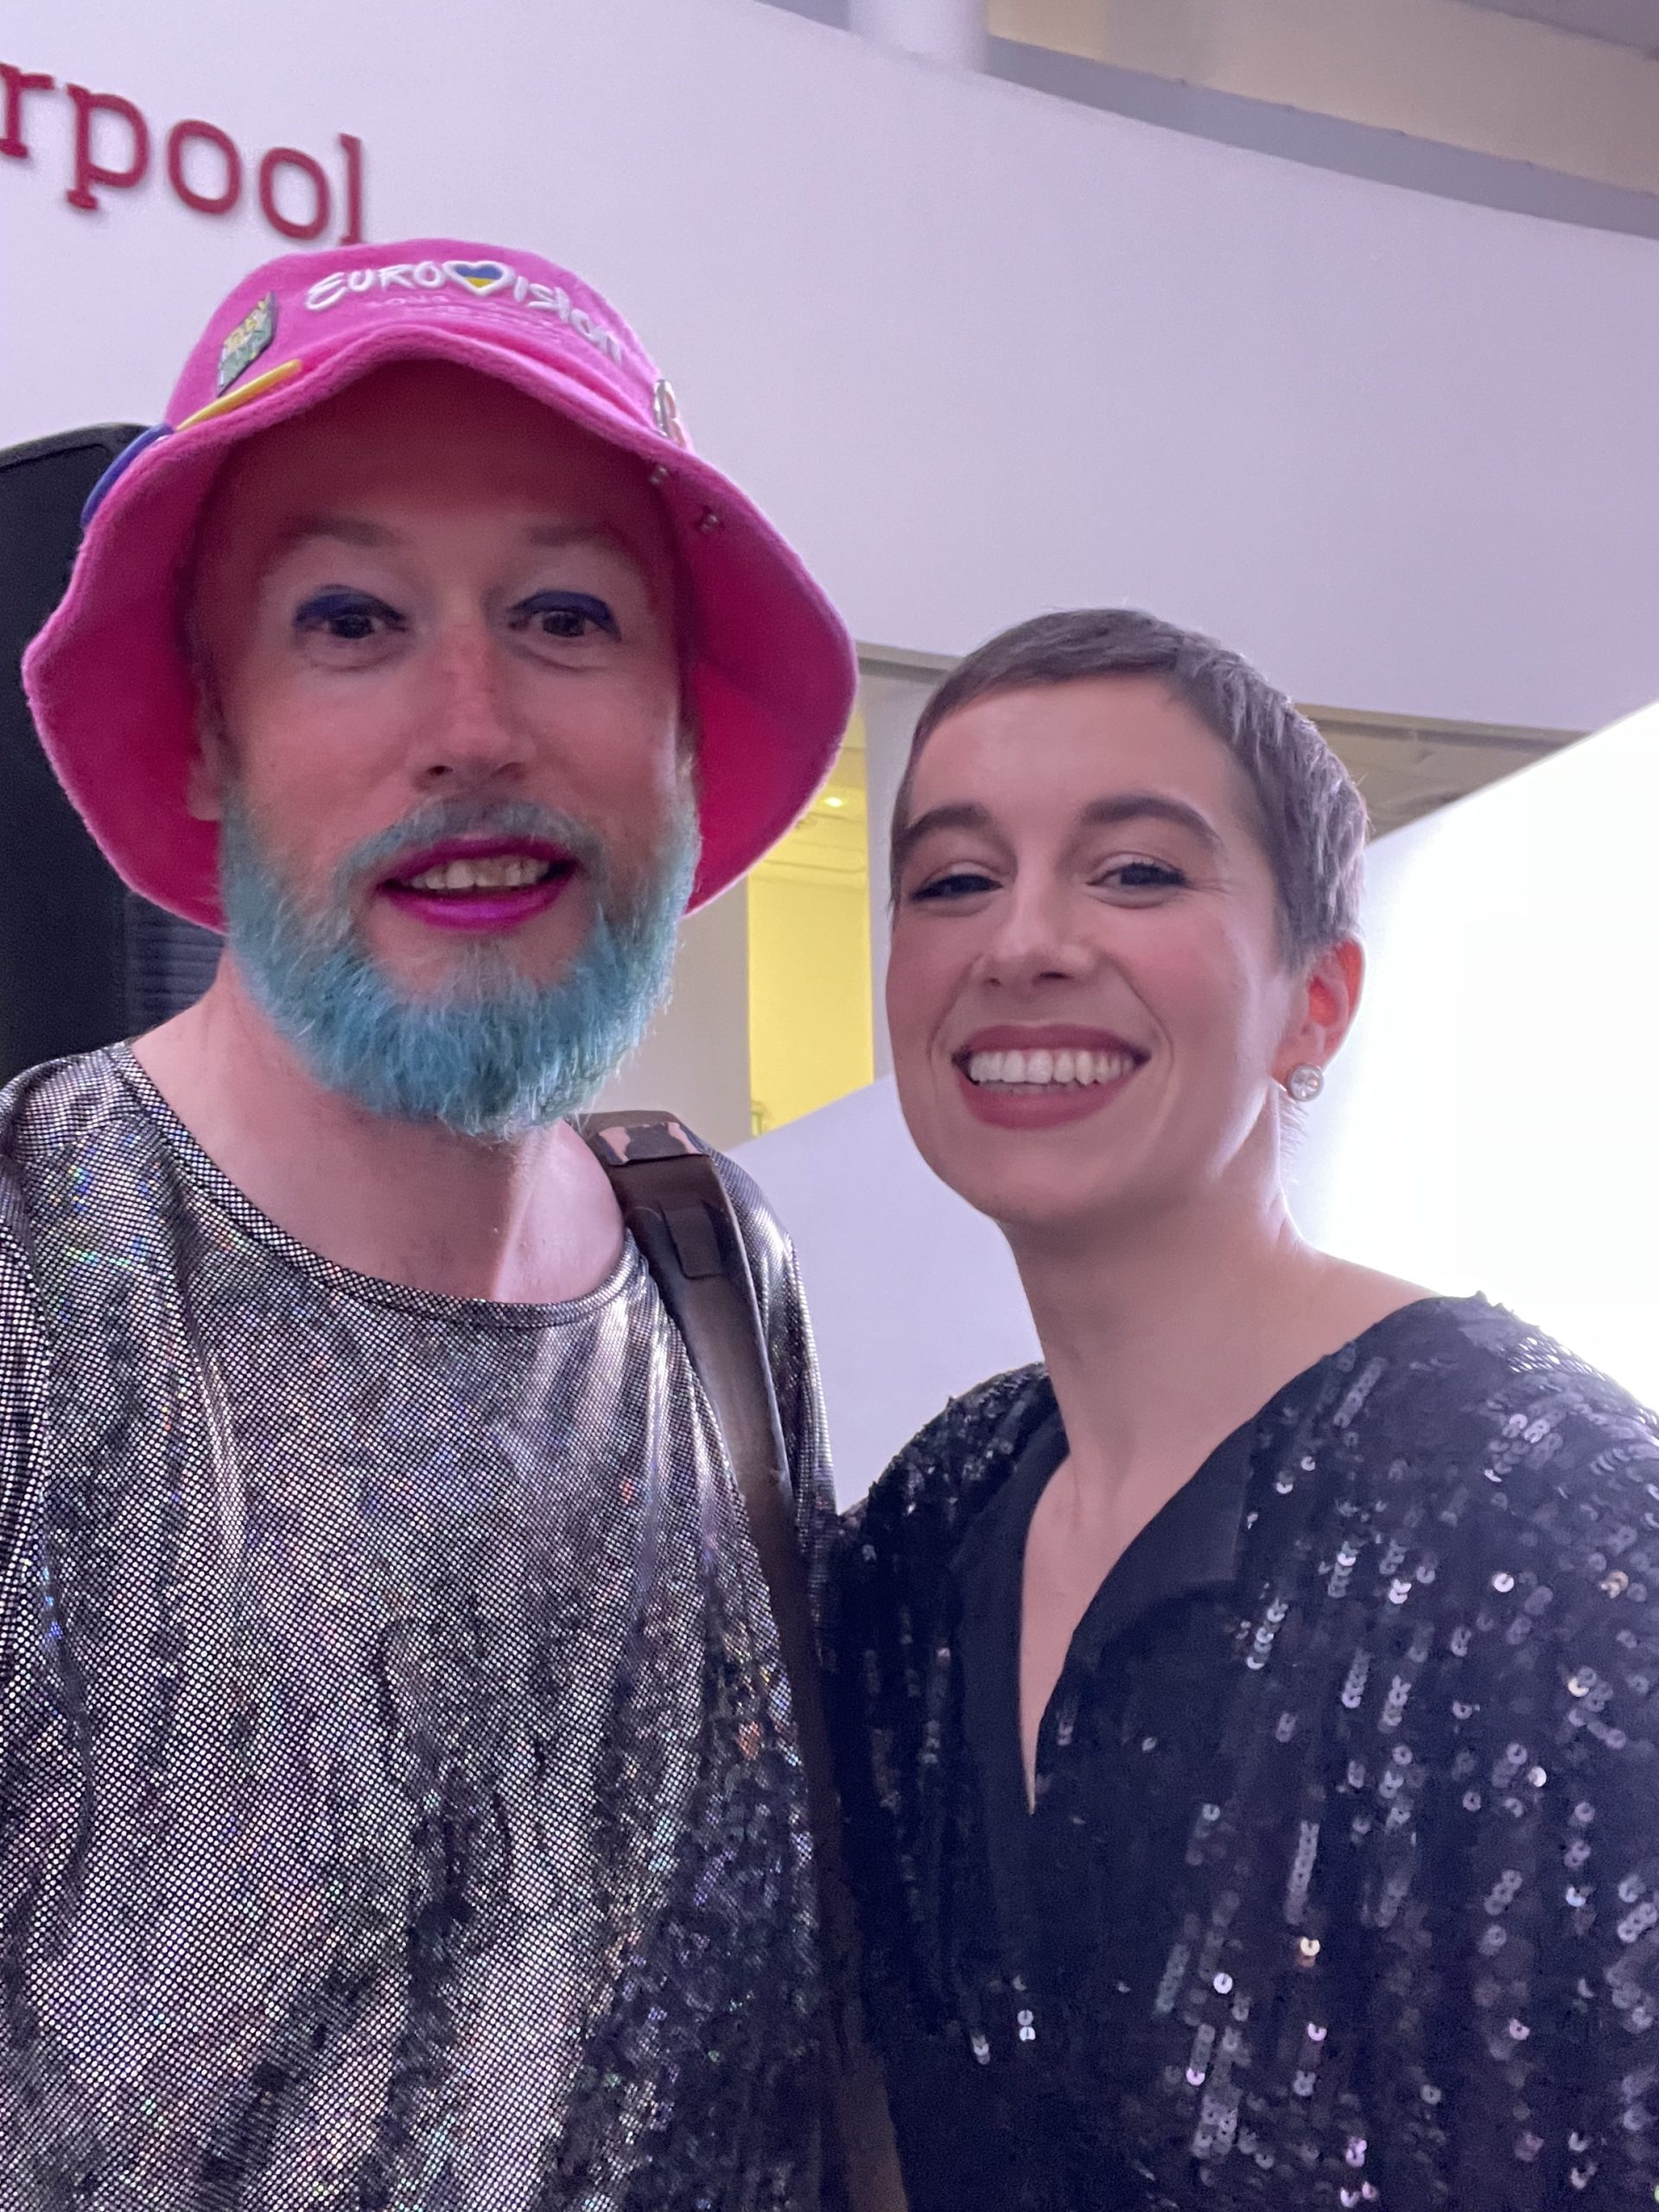 Non-binary person on the left in a sparkly dress, with blue beard and pink hat. Woman singer on the right in black sequin dress. Both smiling to camera.